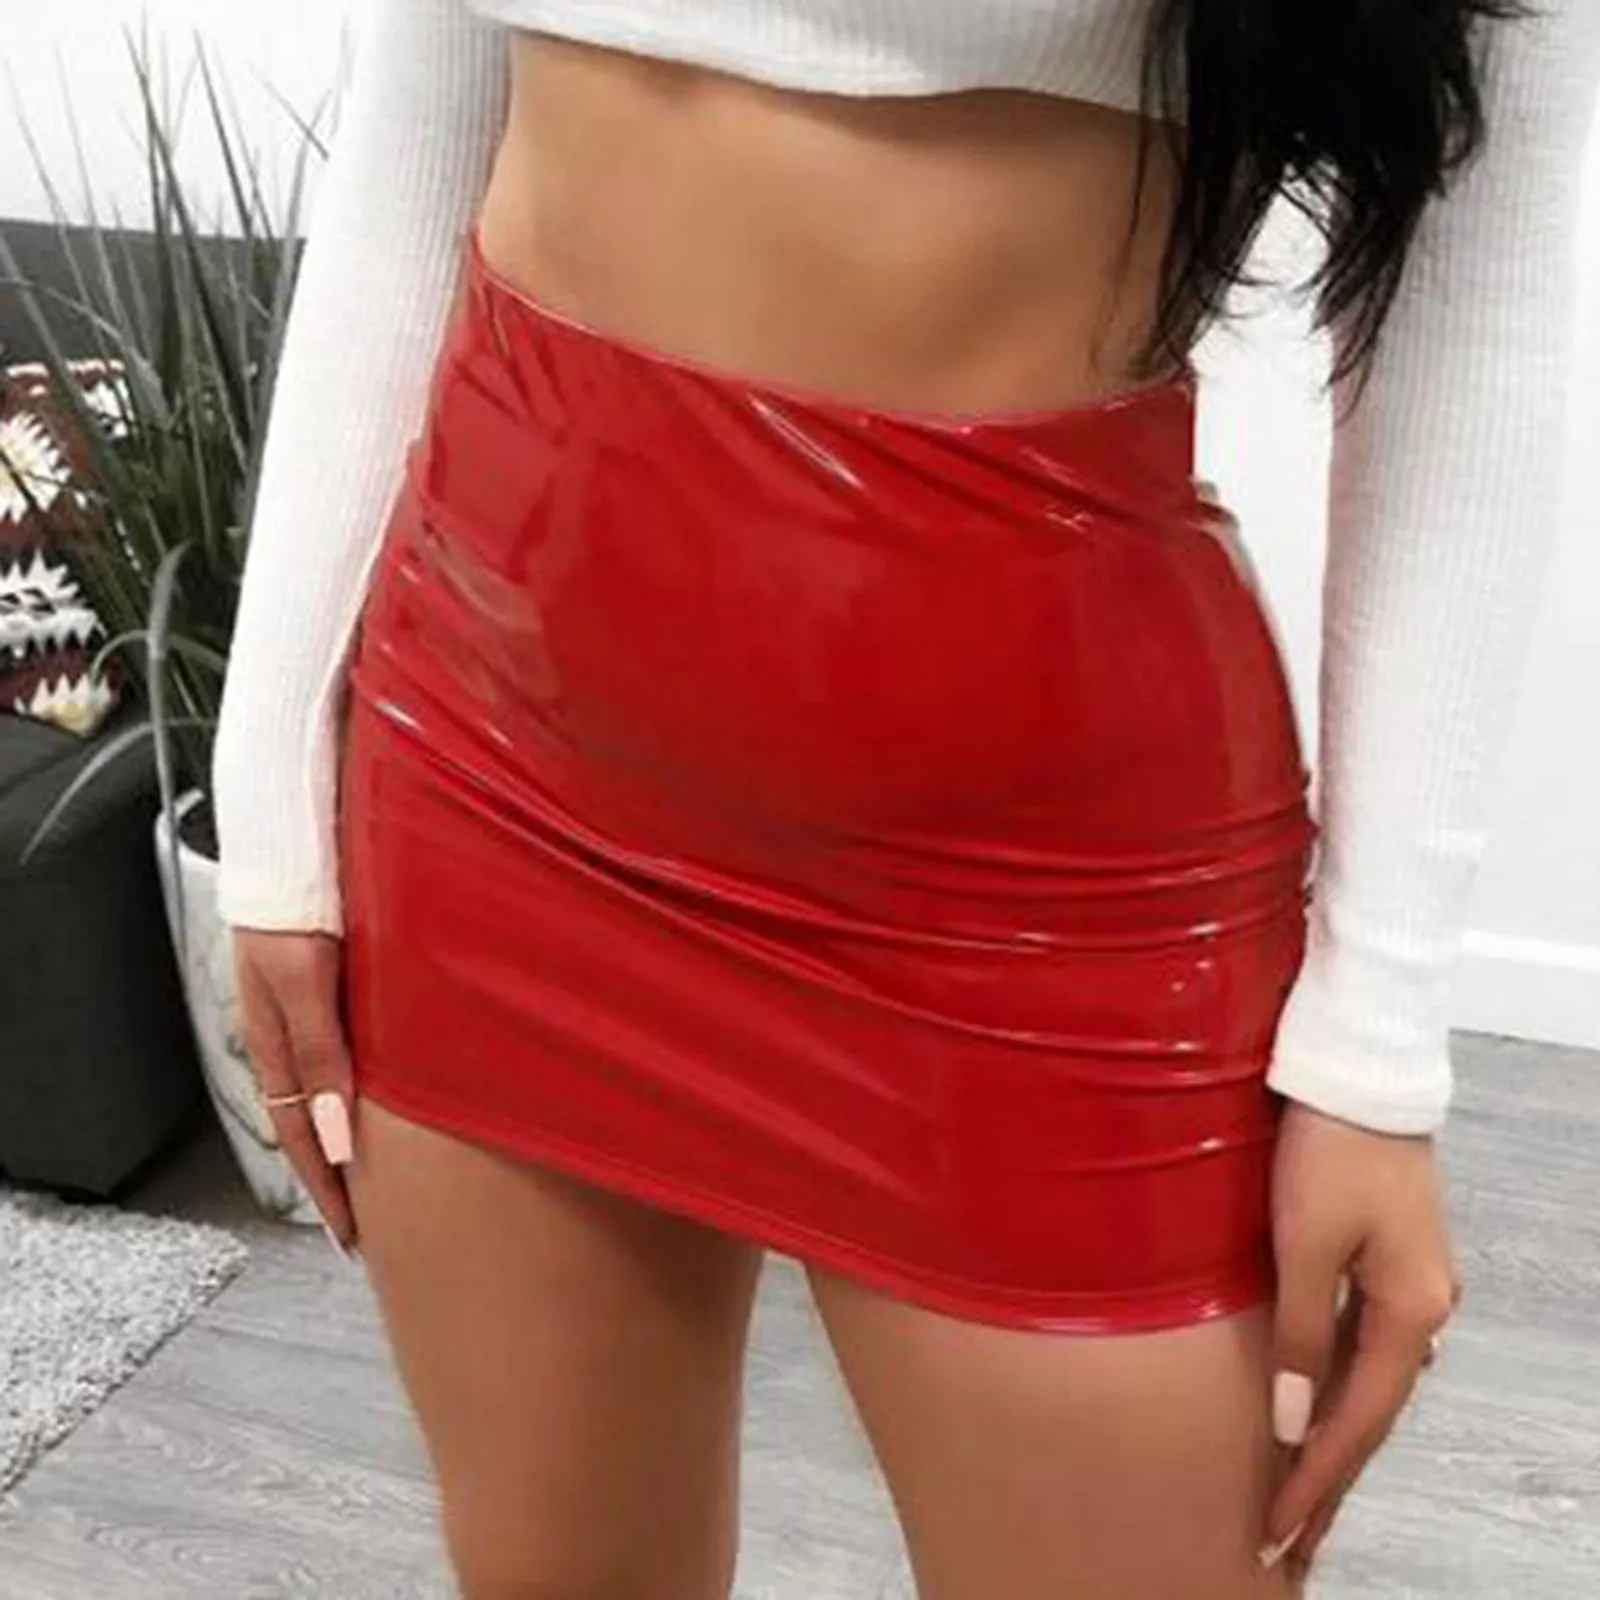 

Women's Wet Look Pu Leather Party Mini Skirt High Waist Slim Fit Sexy Bodycon Pencil Skirts Sexy Short Skirts For Women Clubwear